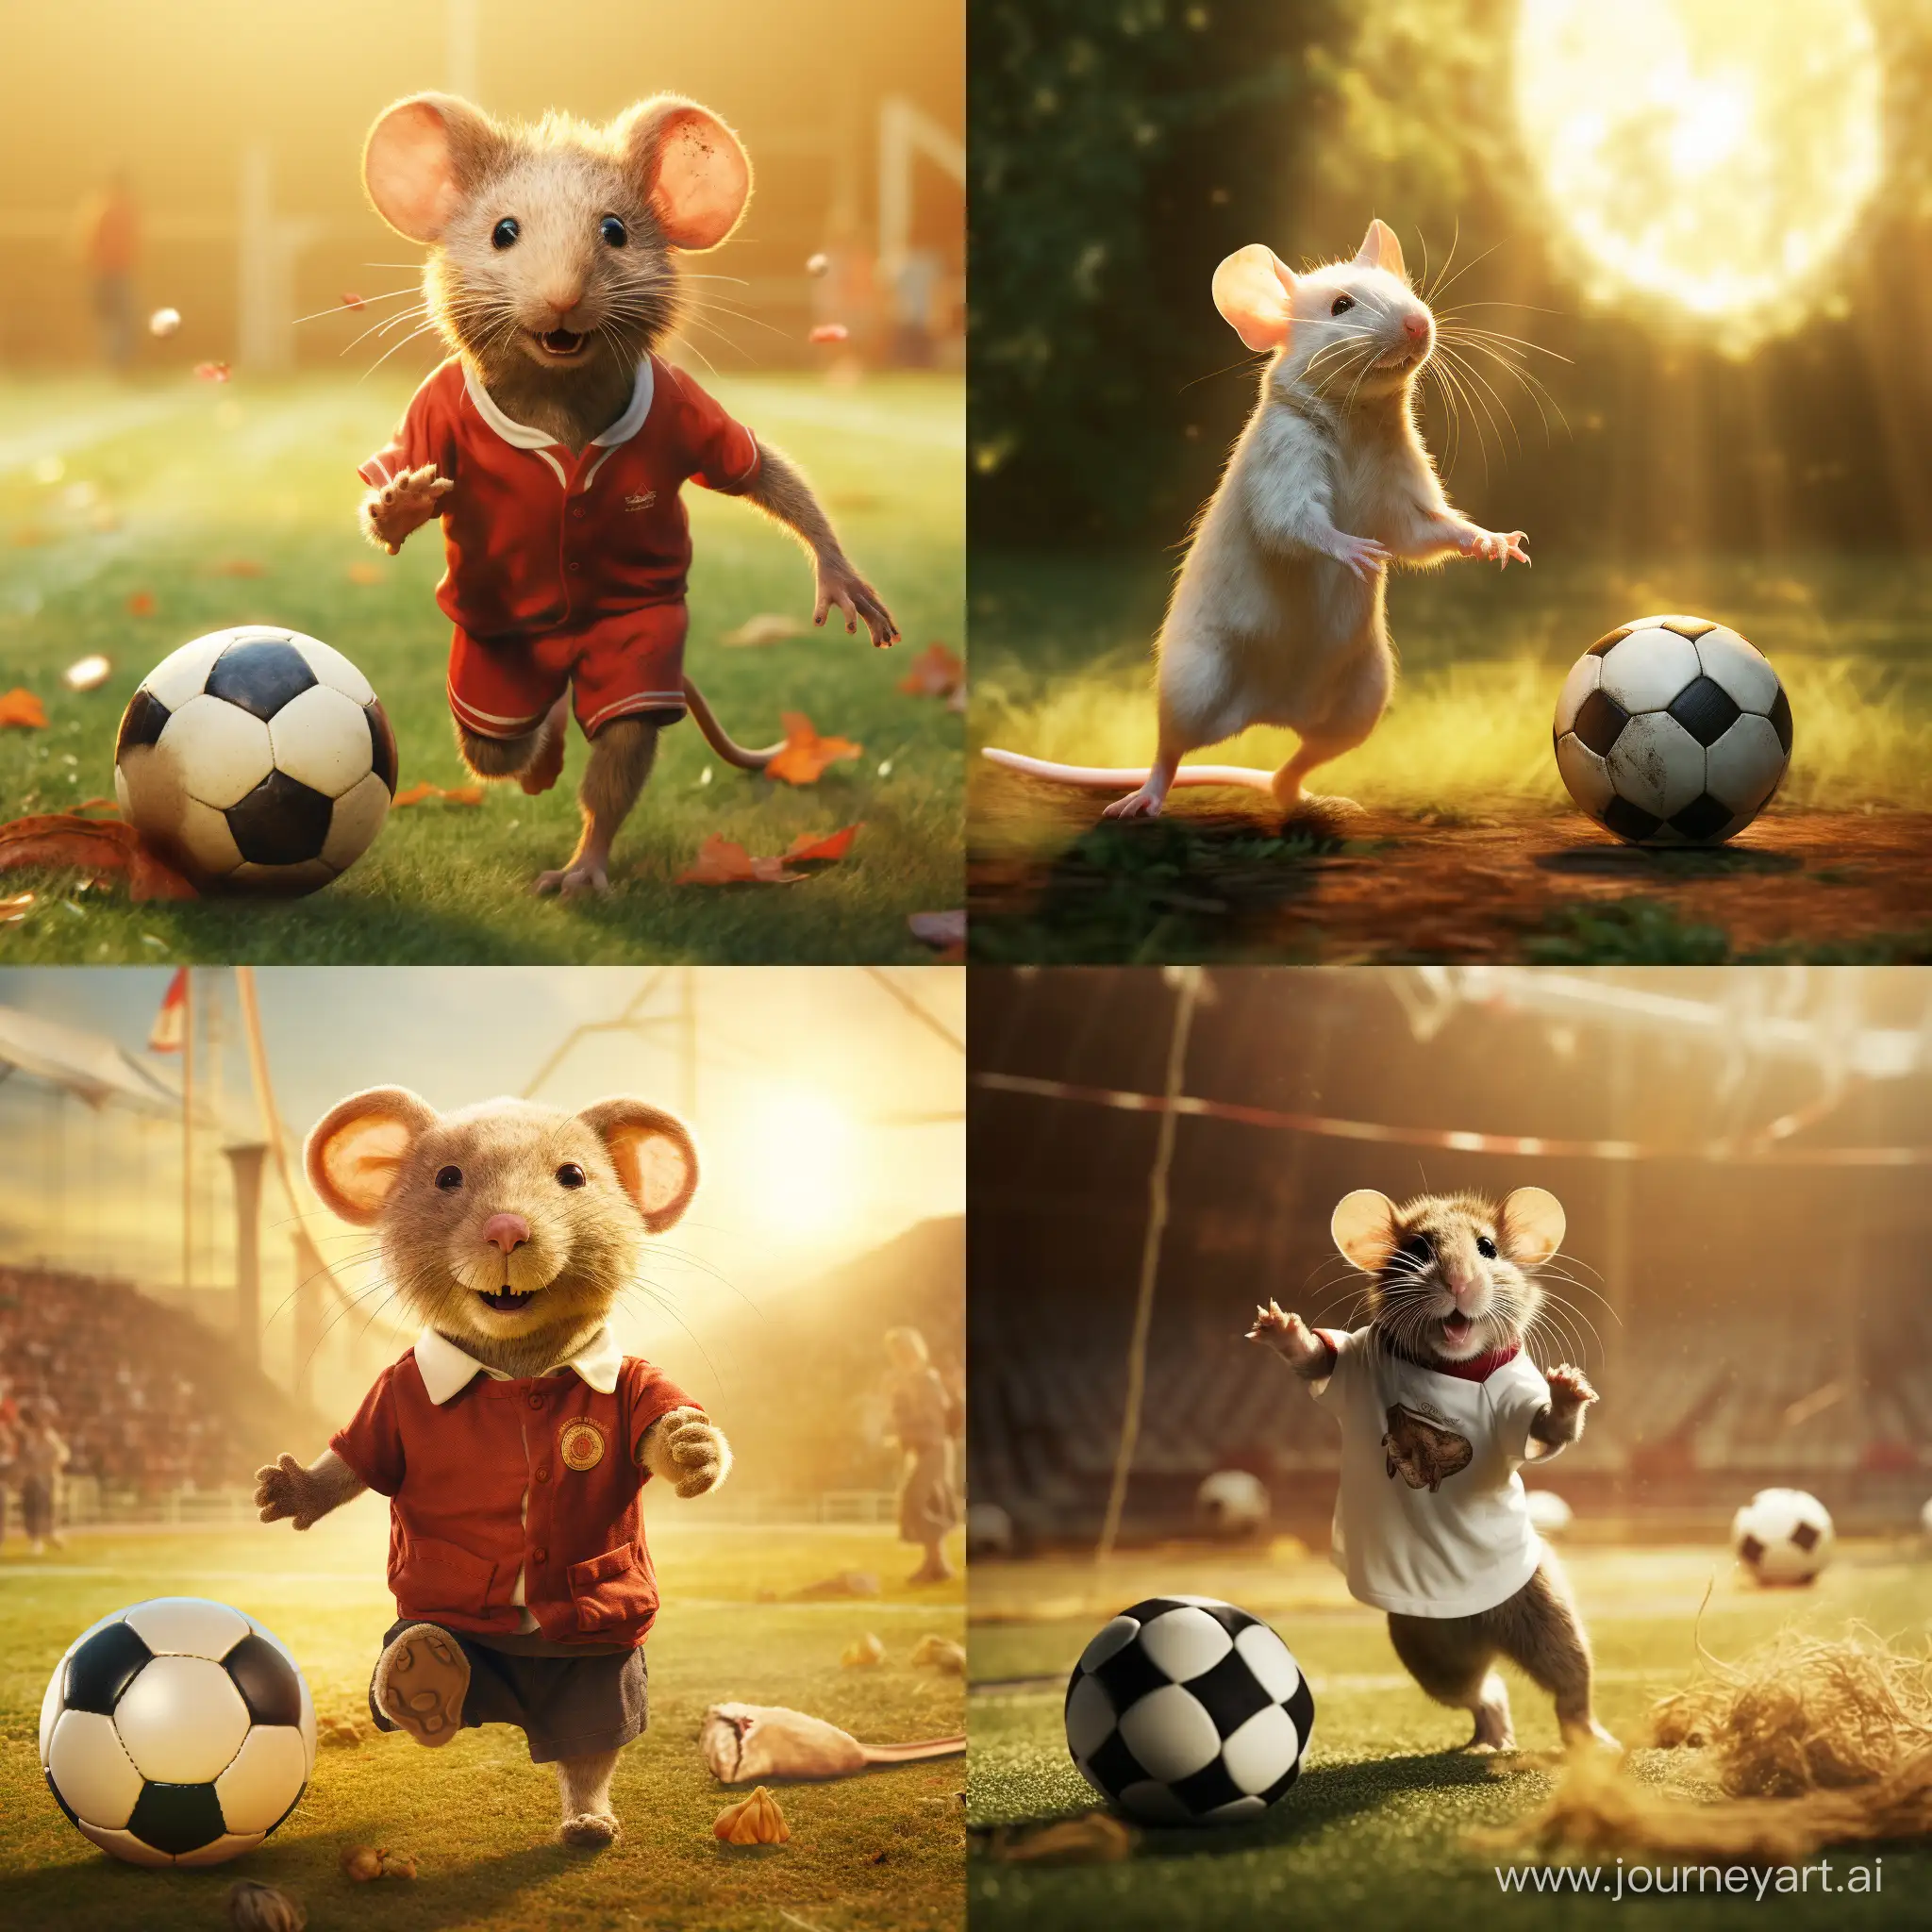 Playful-Mouse-Enjoying-a-Game-of-Football-in-the-Sunshine